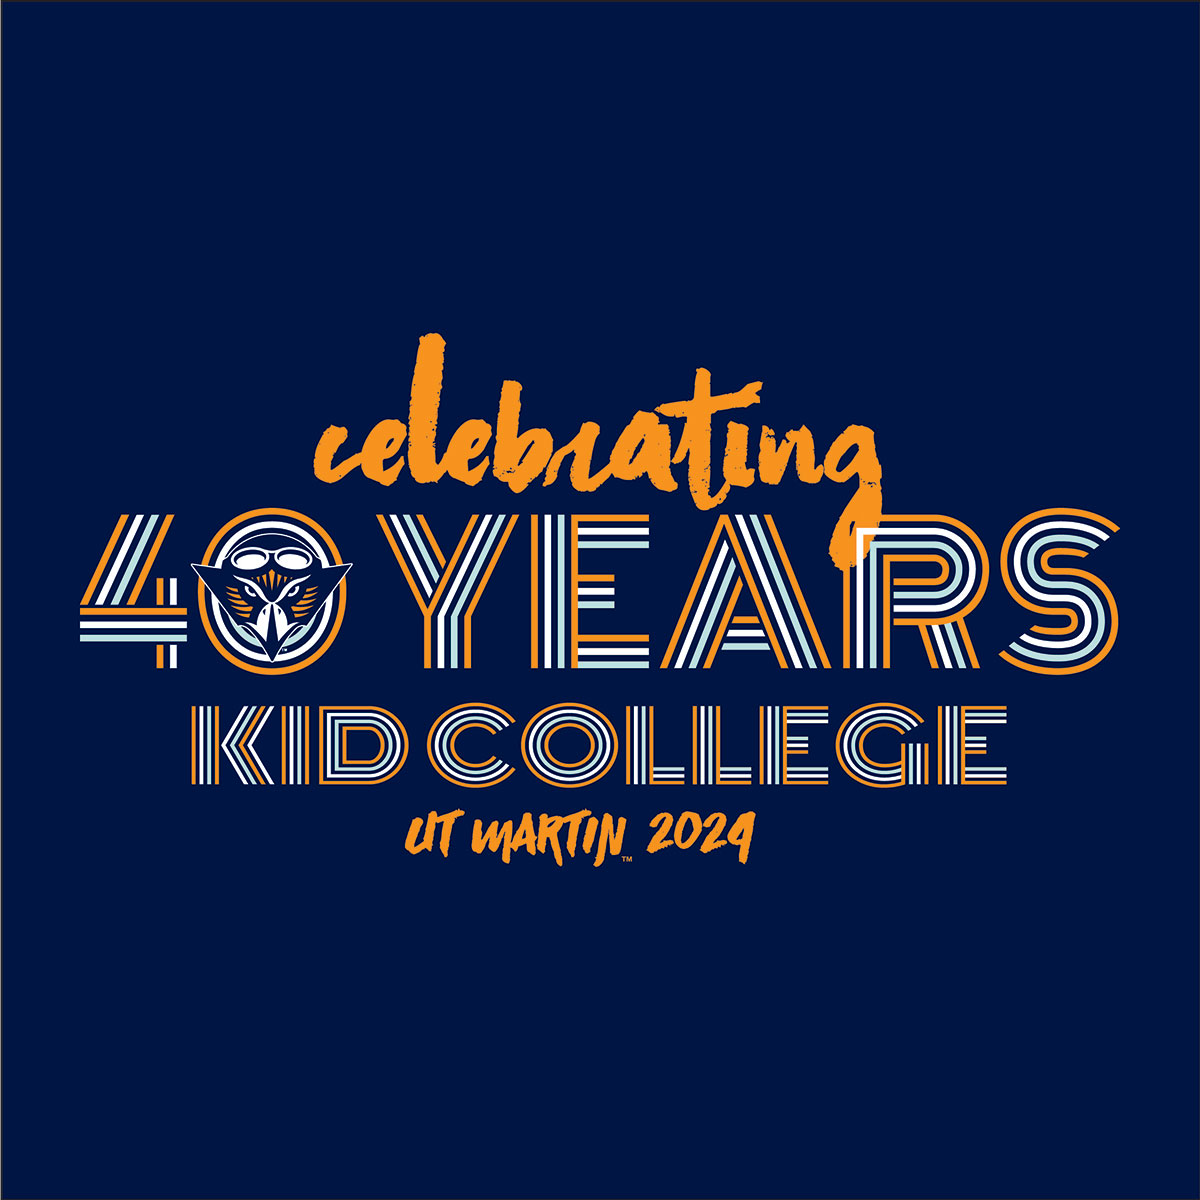 Celebrating 40 years of kid college